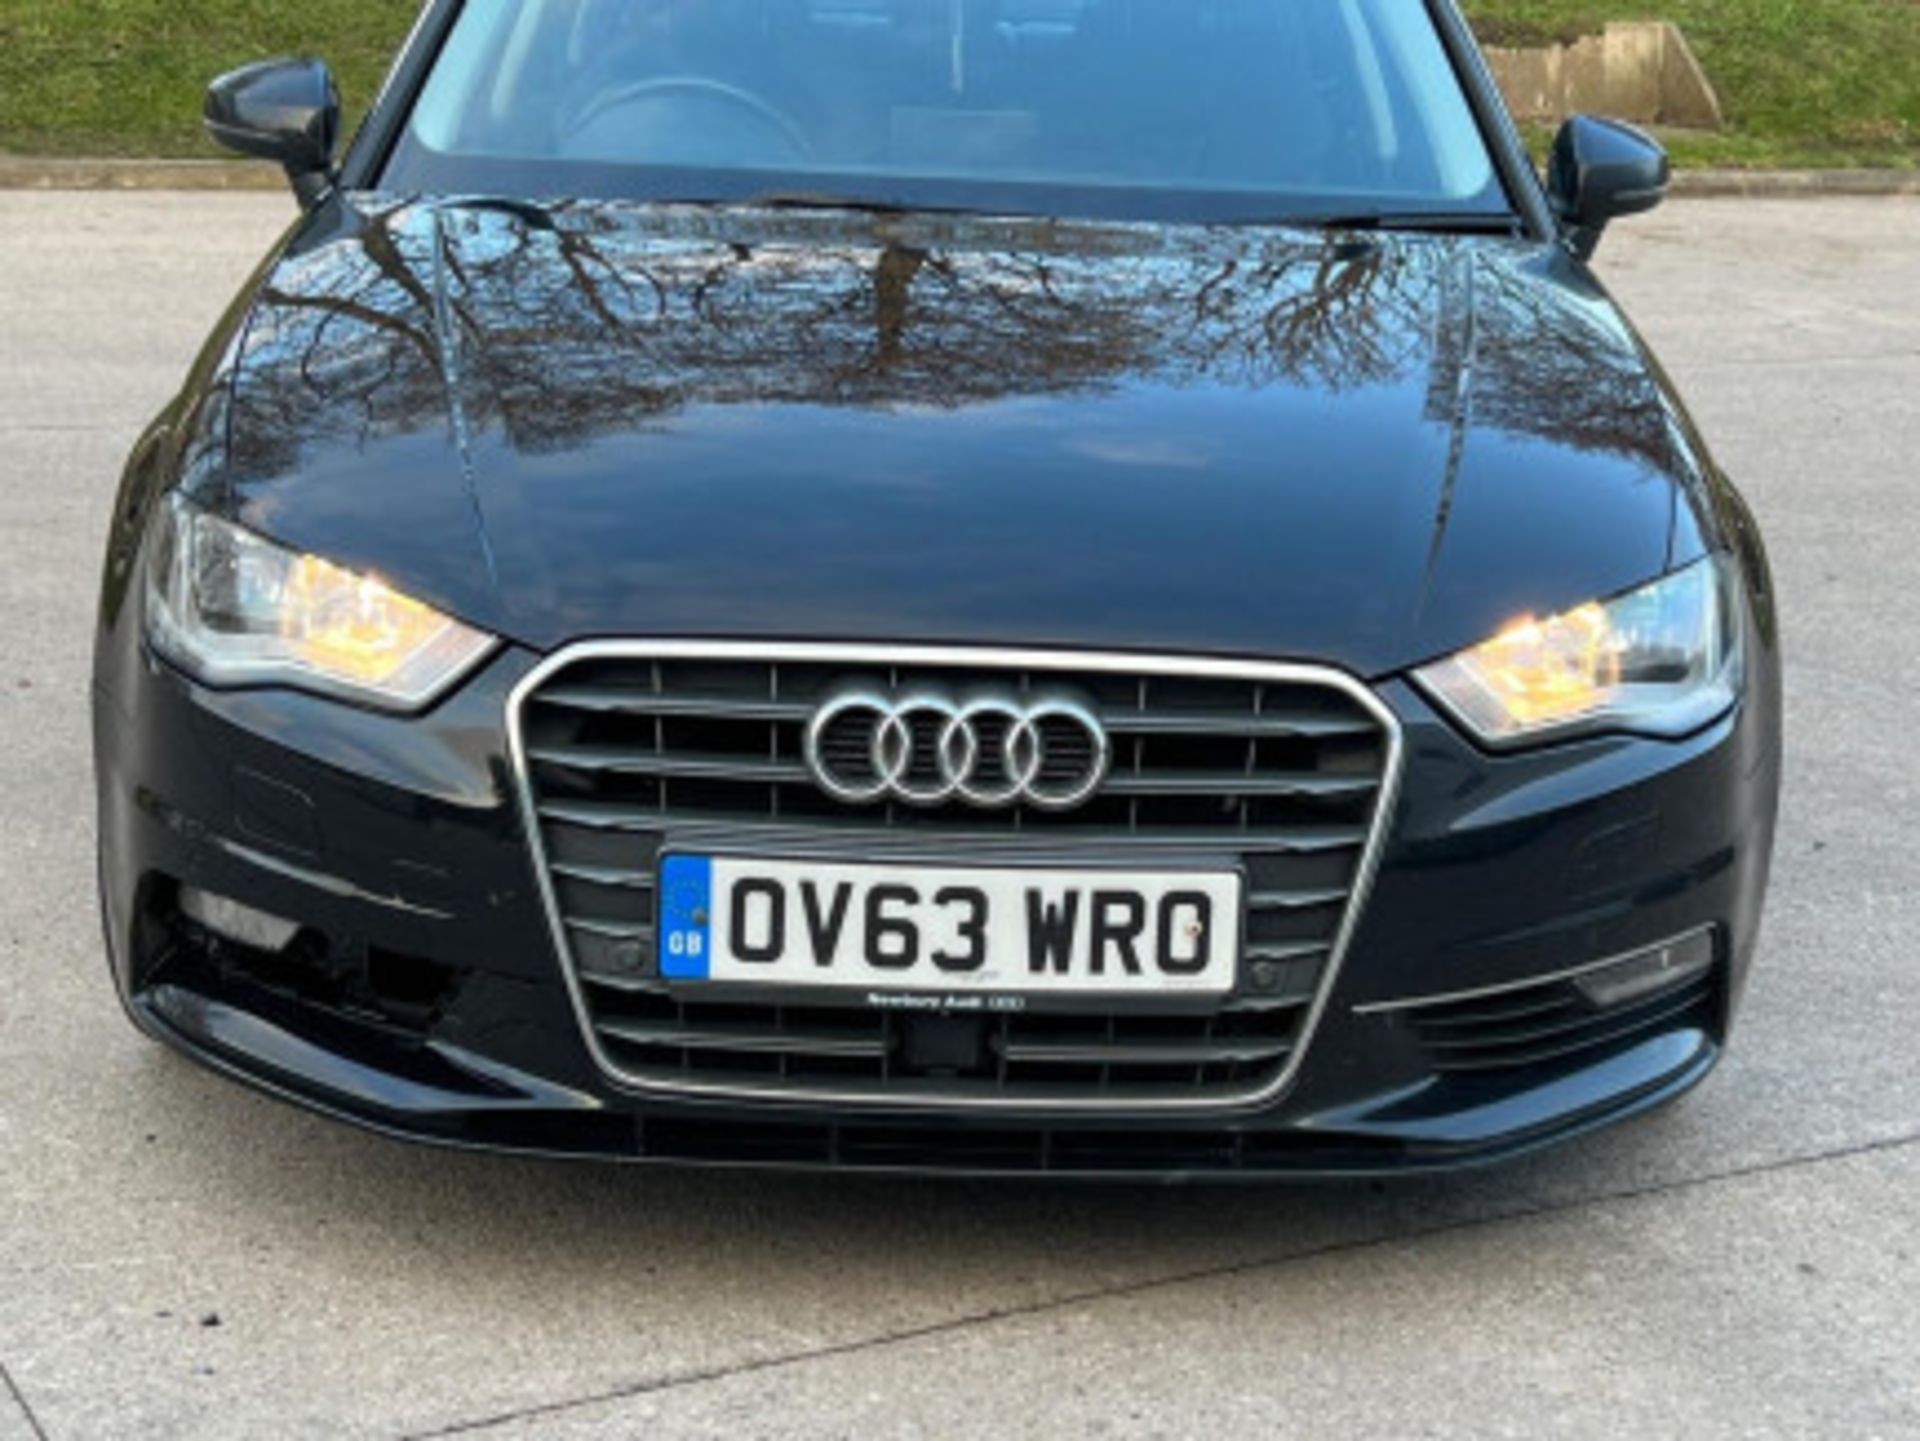 AUDI A3 2.0TDI SPORTBACK - STYLE, PERFORMANCE, AND COMFORT COMBINED >>--NO VAT ON HAMMER--<< - Image 15 of 216